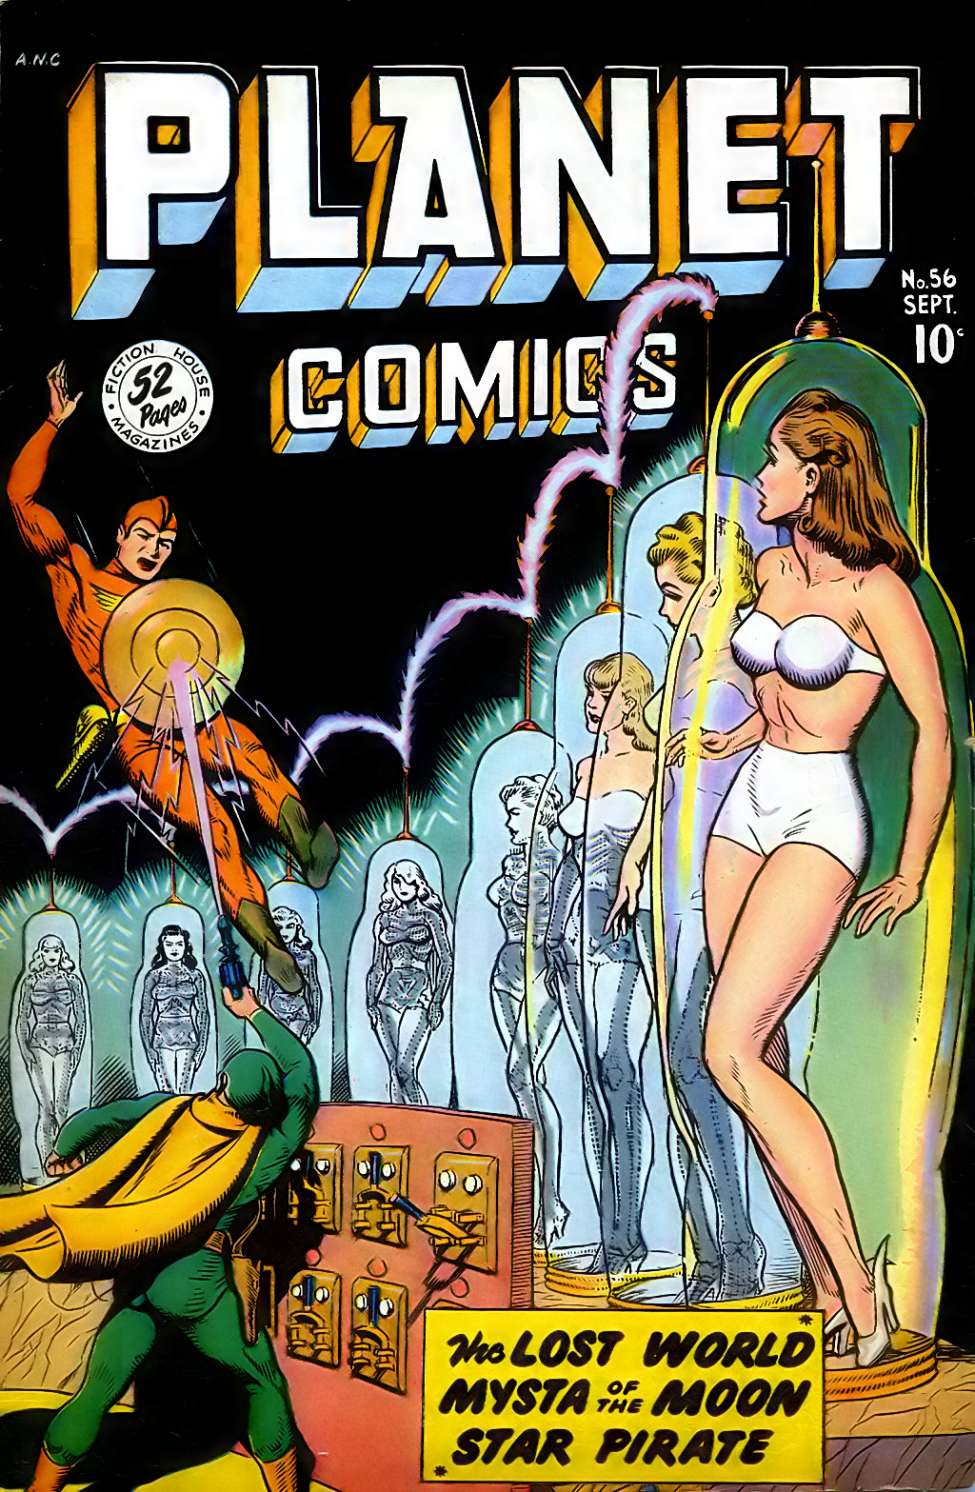 Book Cover For Planet Comics 56 - Version 1